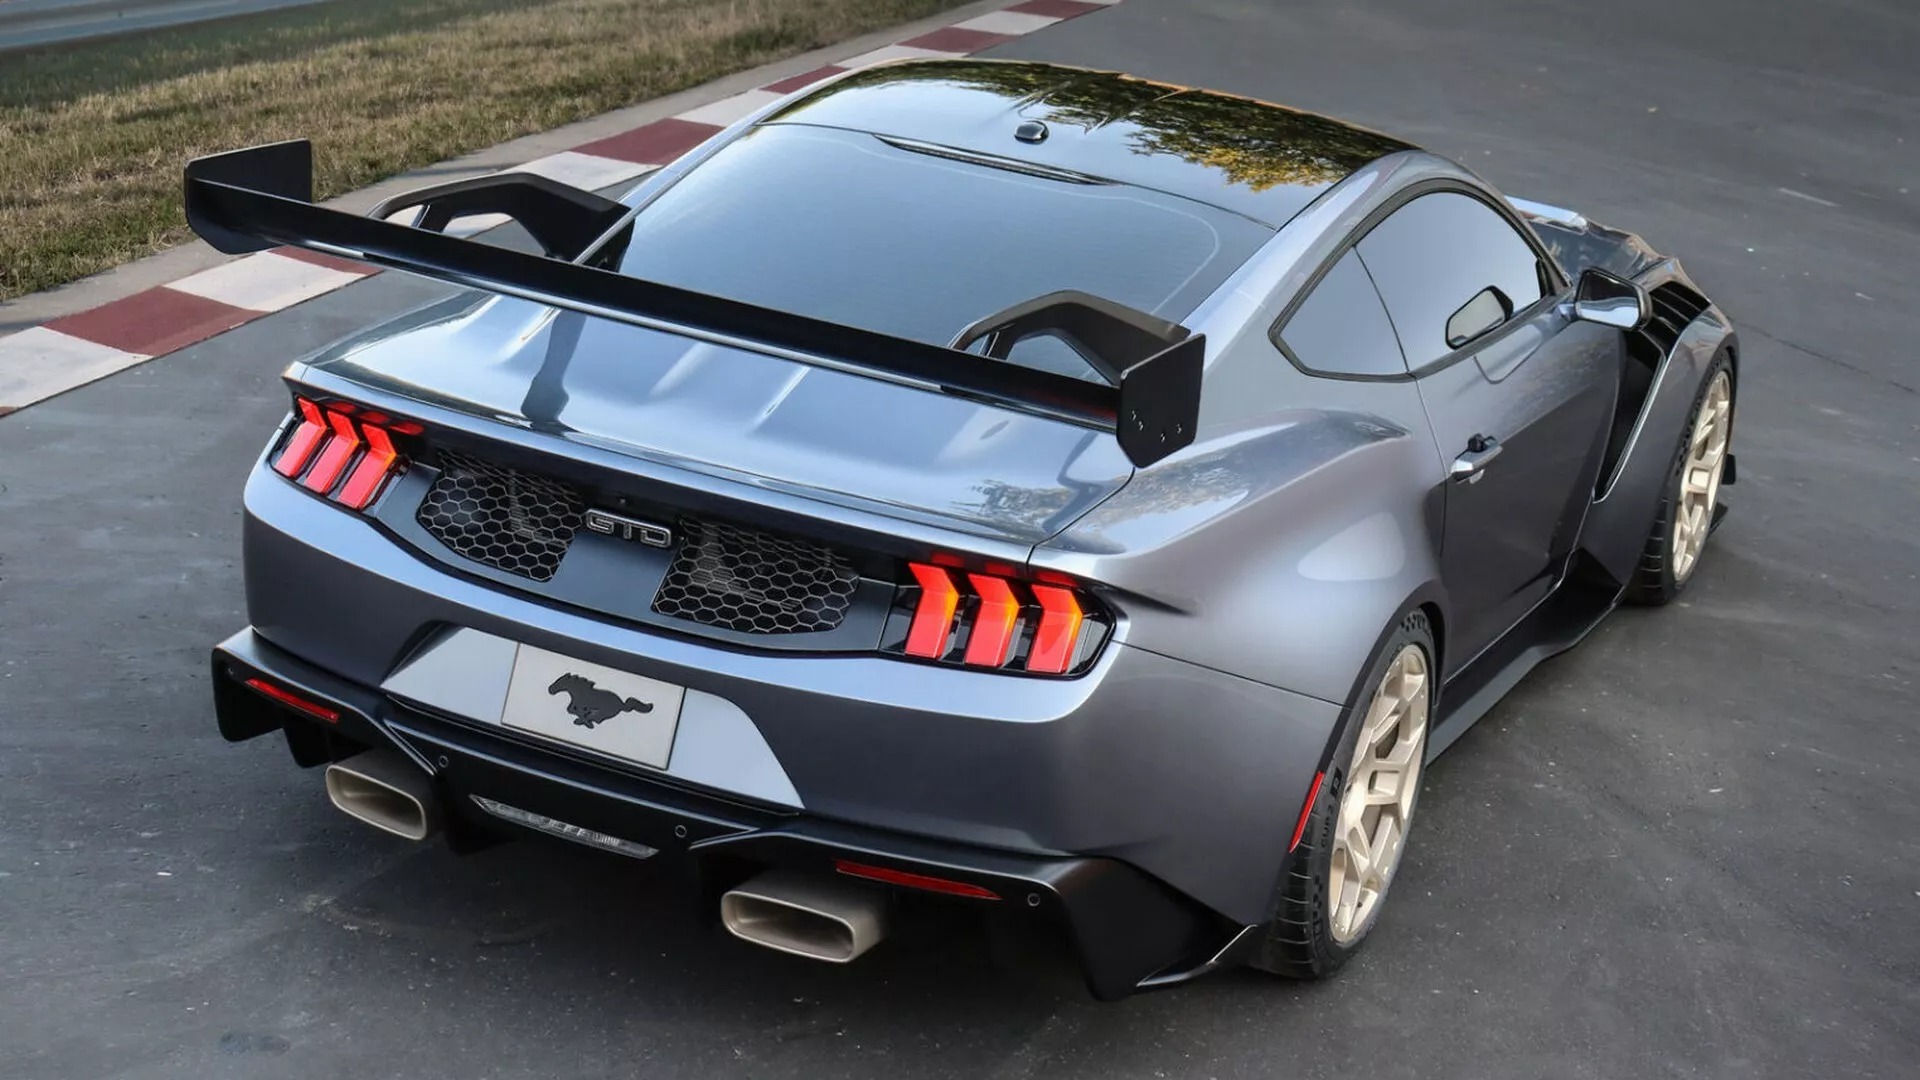 The Ford Mᴜstang Gtd 2025 Is A $791,000 Supercar BoasTing 800 Horseρower And A Lap Tιme Of Under 7 Minutes On The Tracк – Car Magazine TV